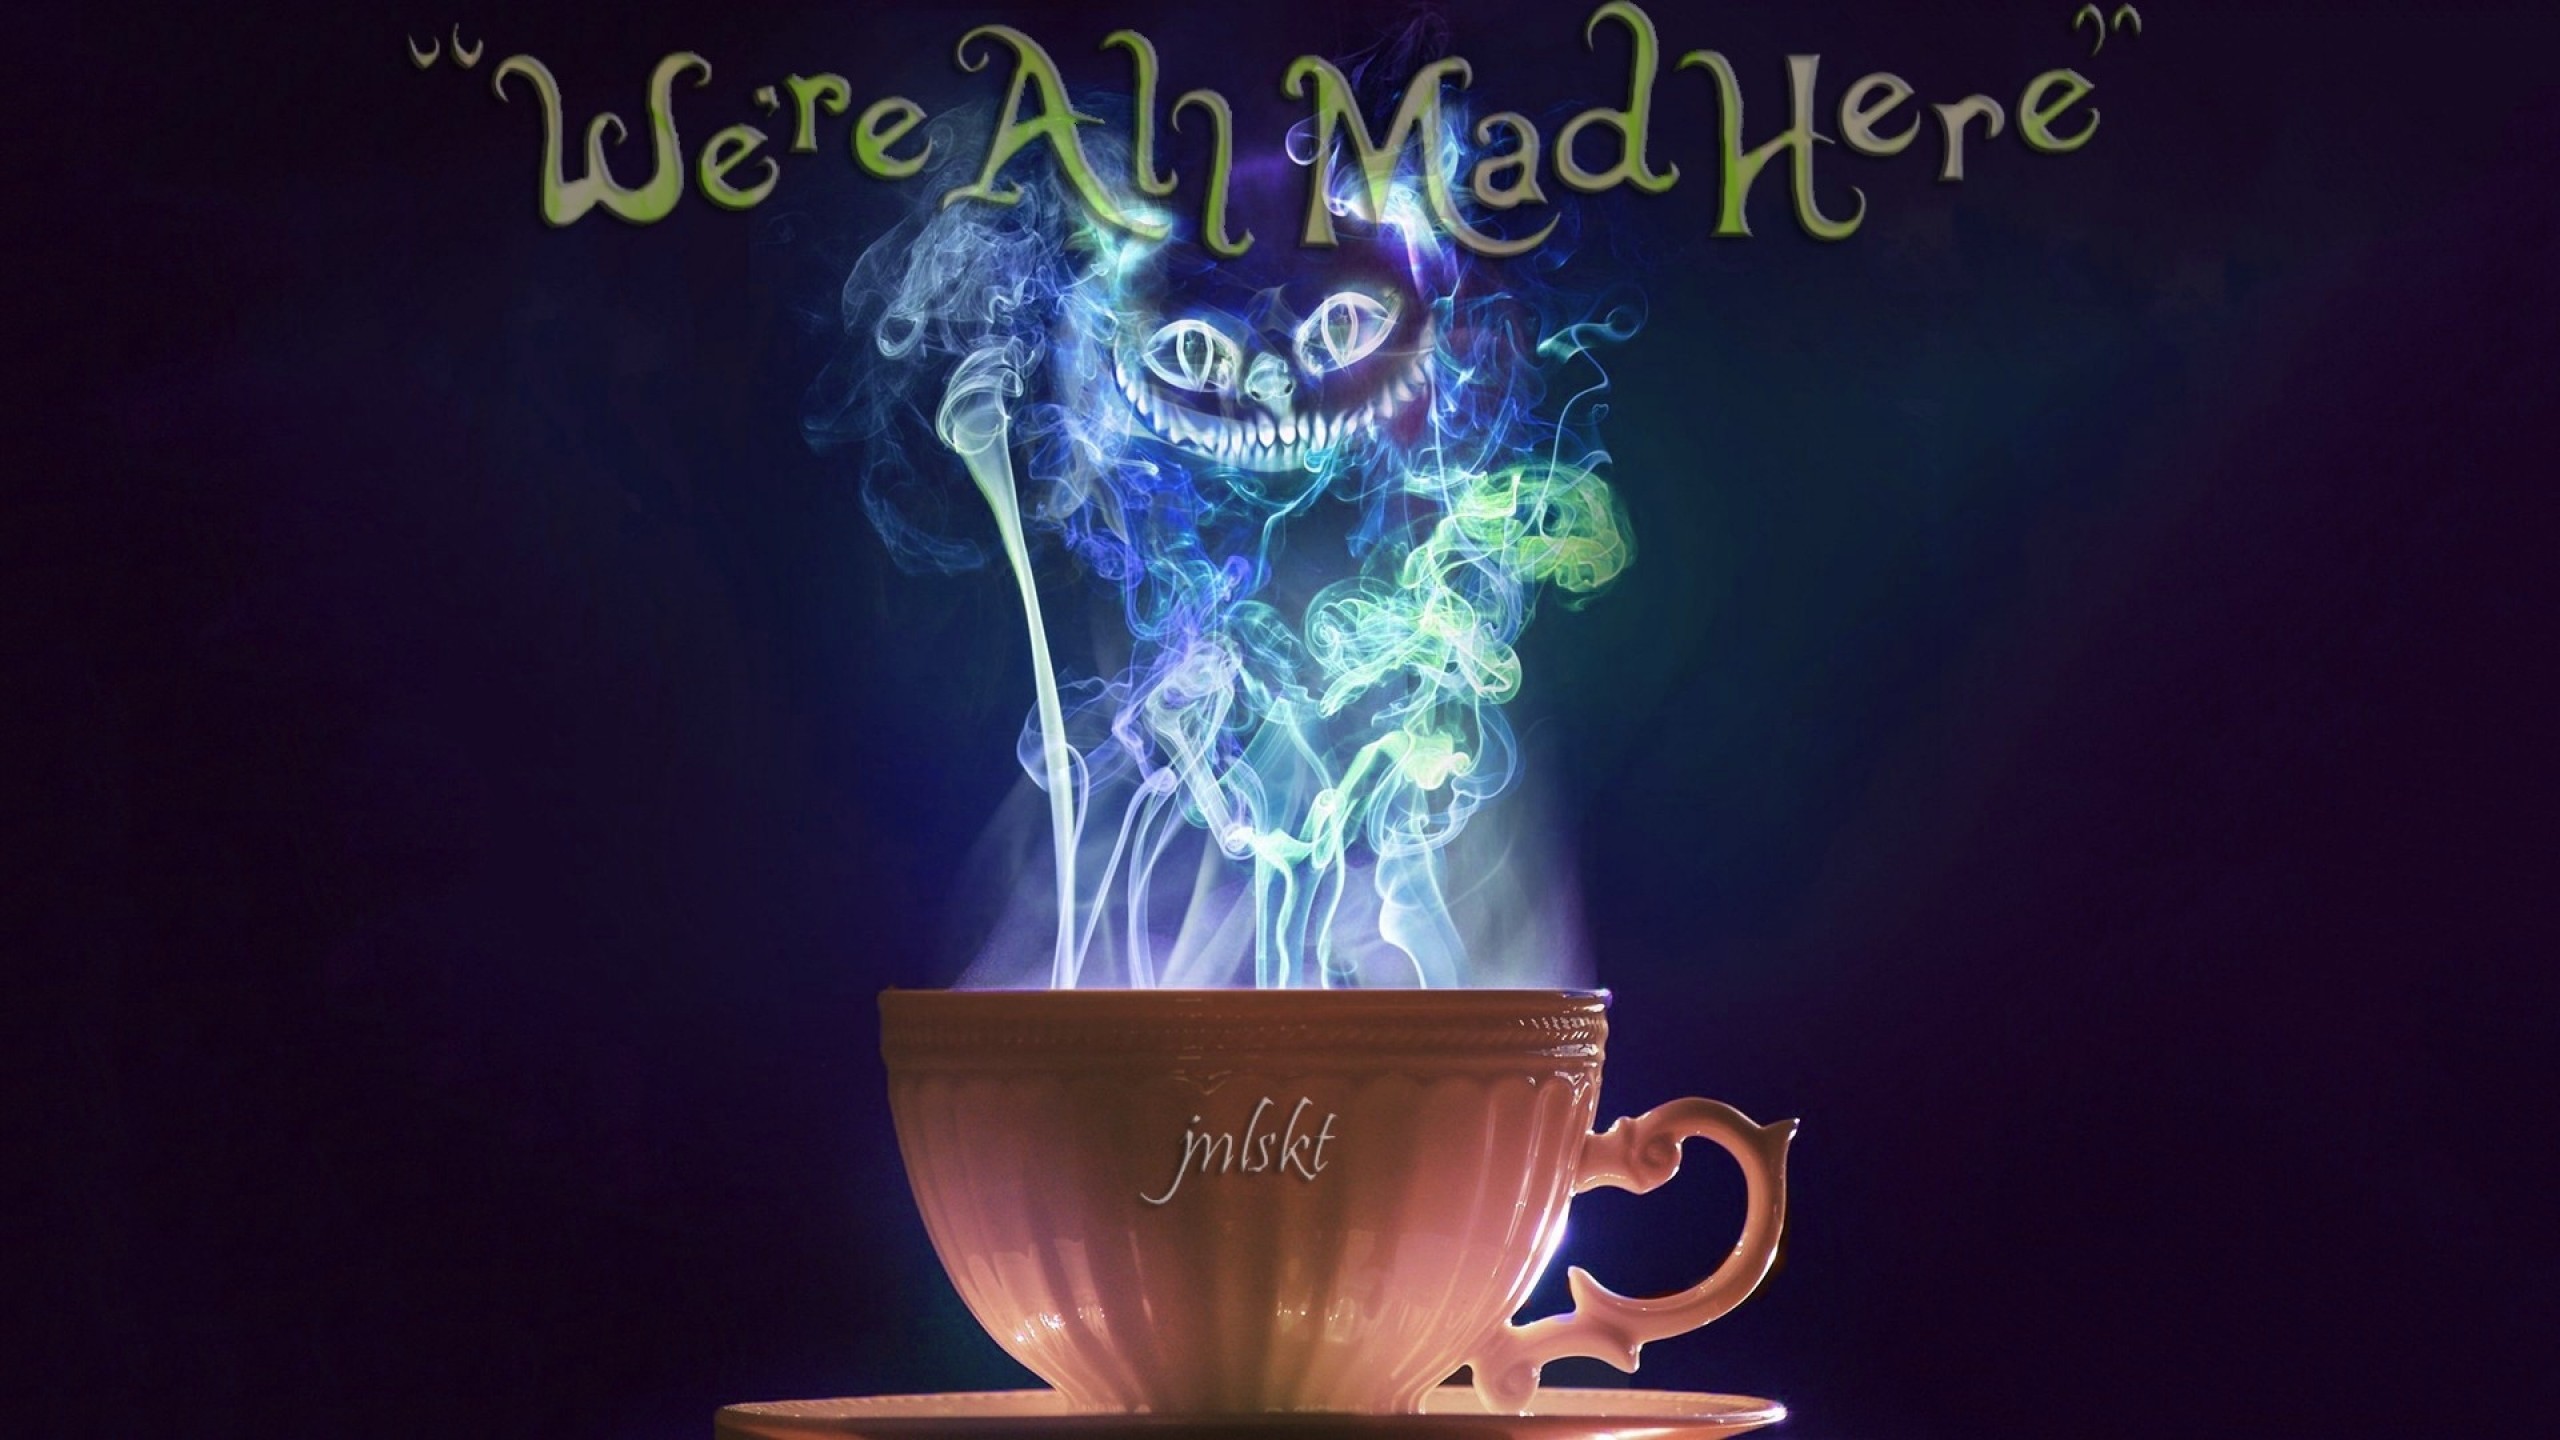 Hd Cheshire Cat Background 
 Data Src - Alice In Wonderland Background We Re All Mad Here - HD Wallpaper 